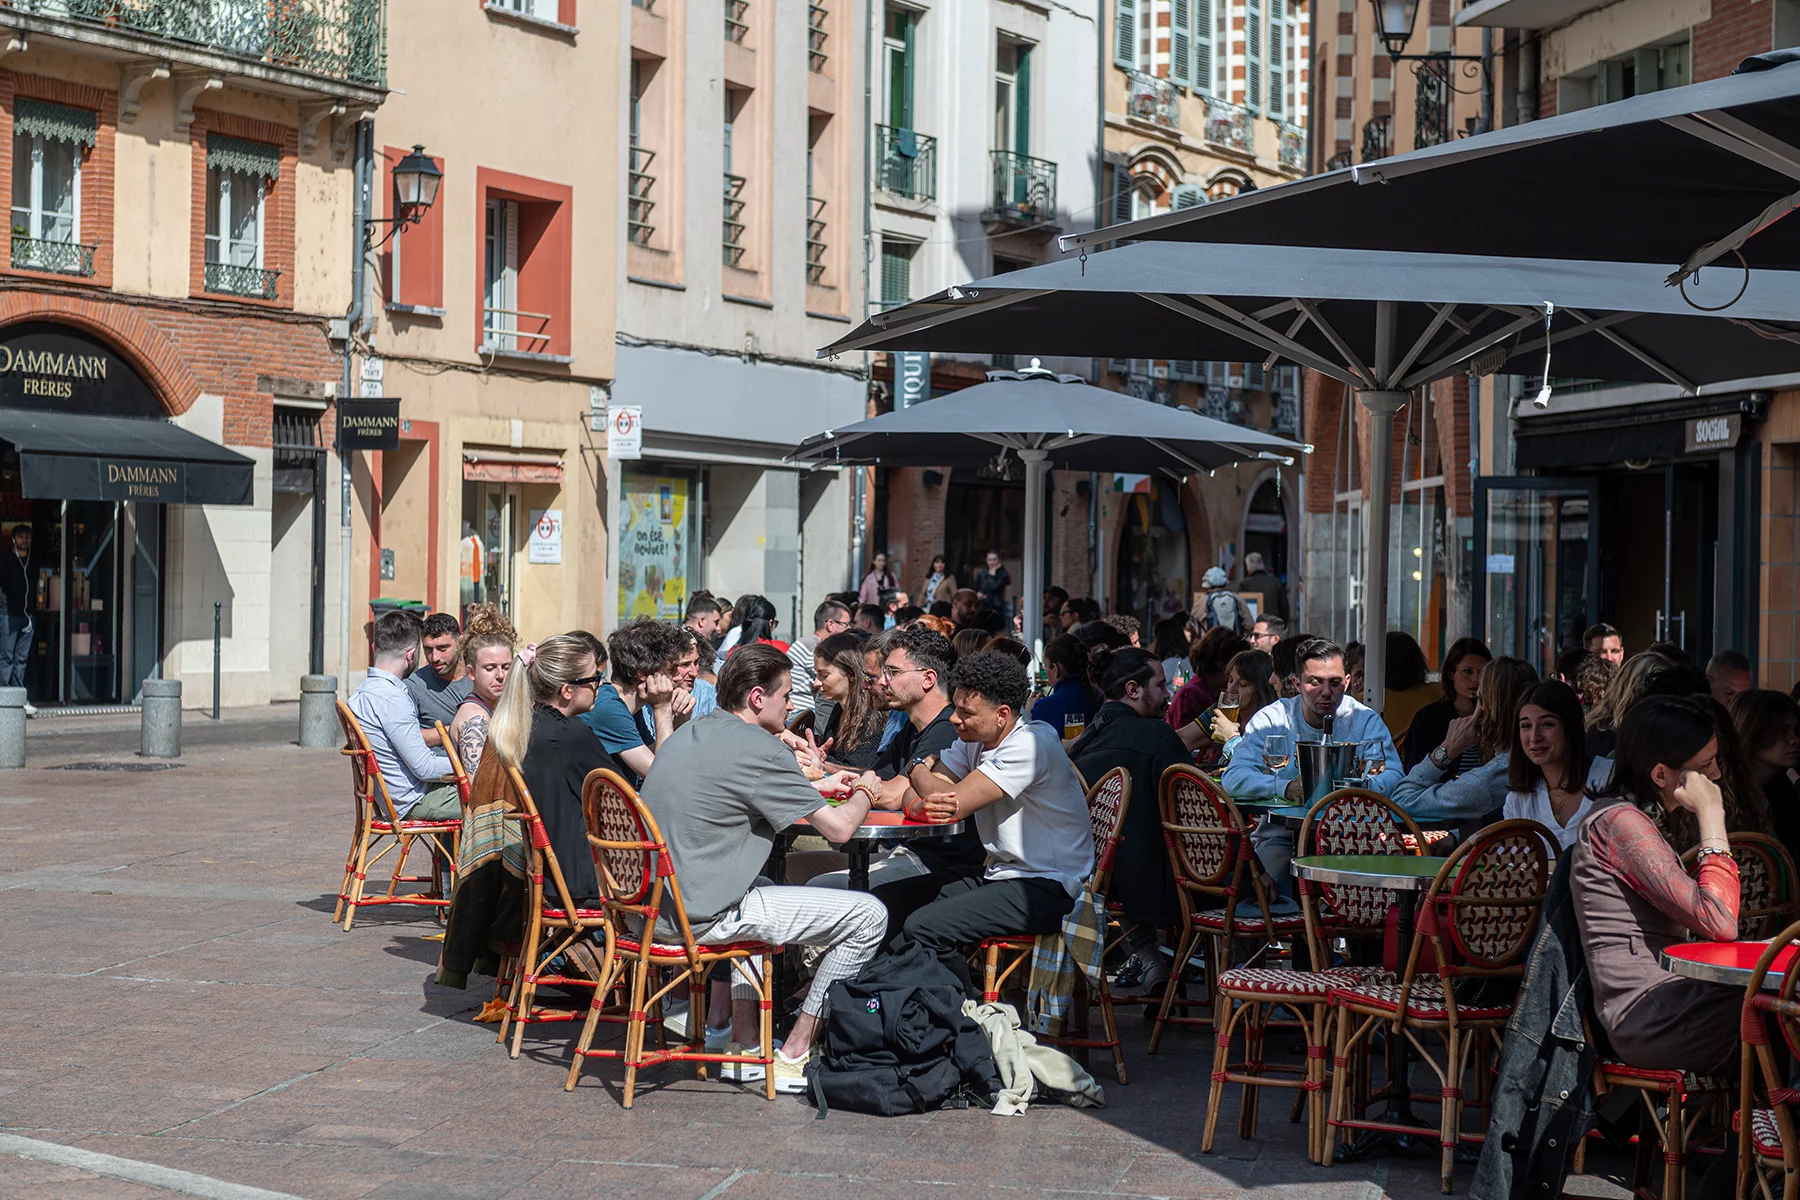 Lots of young people sitting at an outdoor café in Toulouse